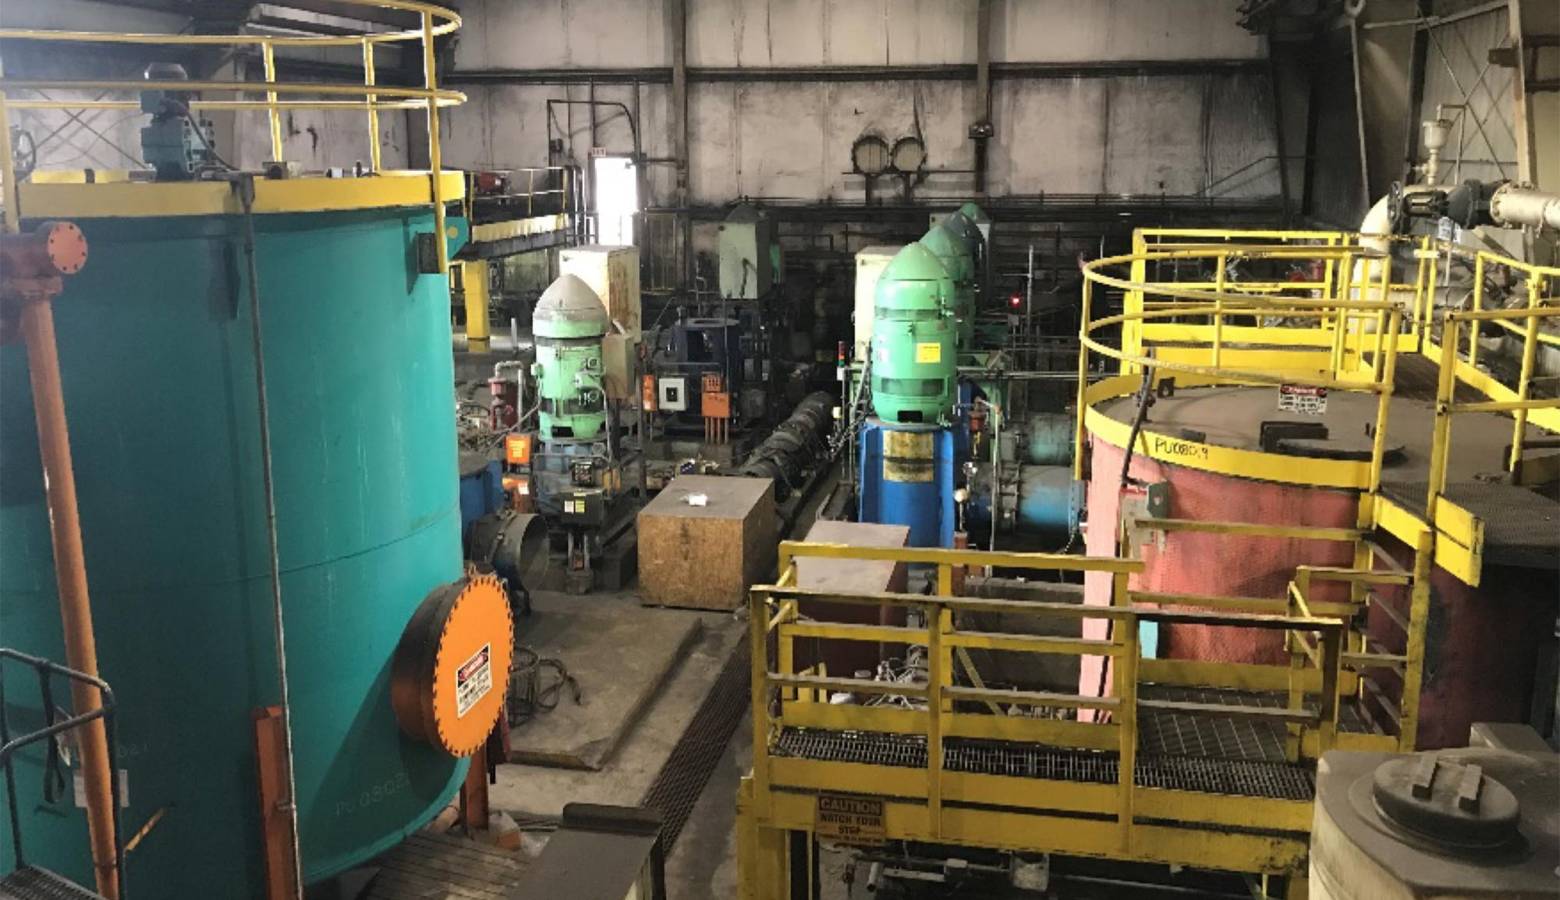 This is the room where equipment failed at ArcelorMittal’s Burns Harbor facility which eventually led to the cyanide and ammonia spill in August — the blast furnace gas washing recycle system pump station. (Courtesy of IDEM)